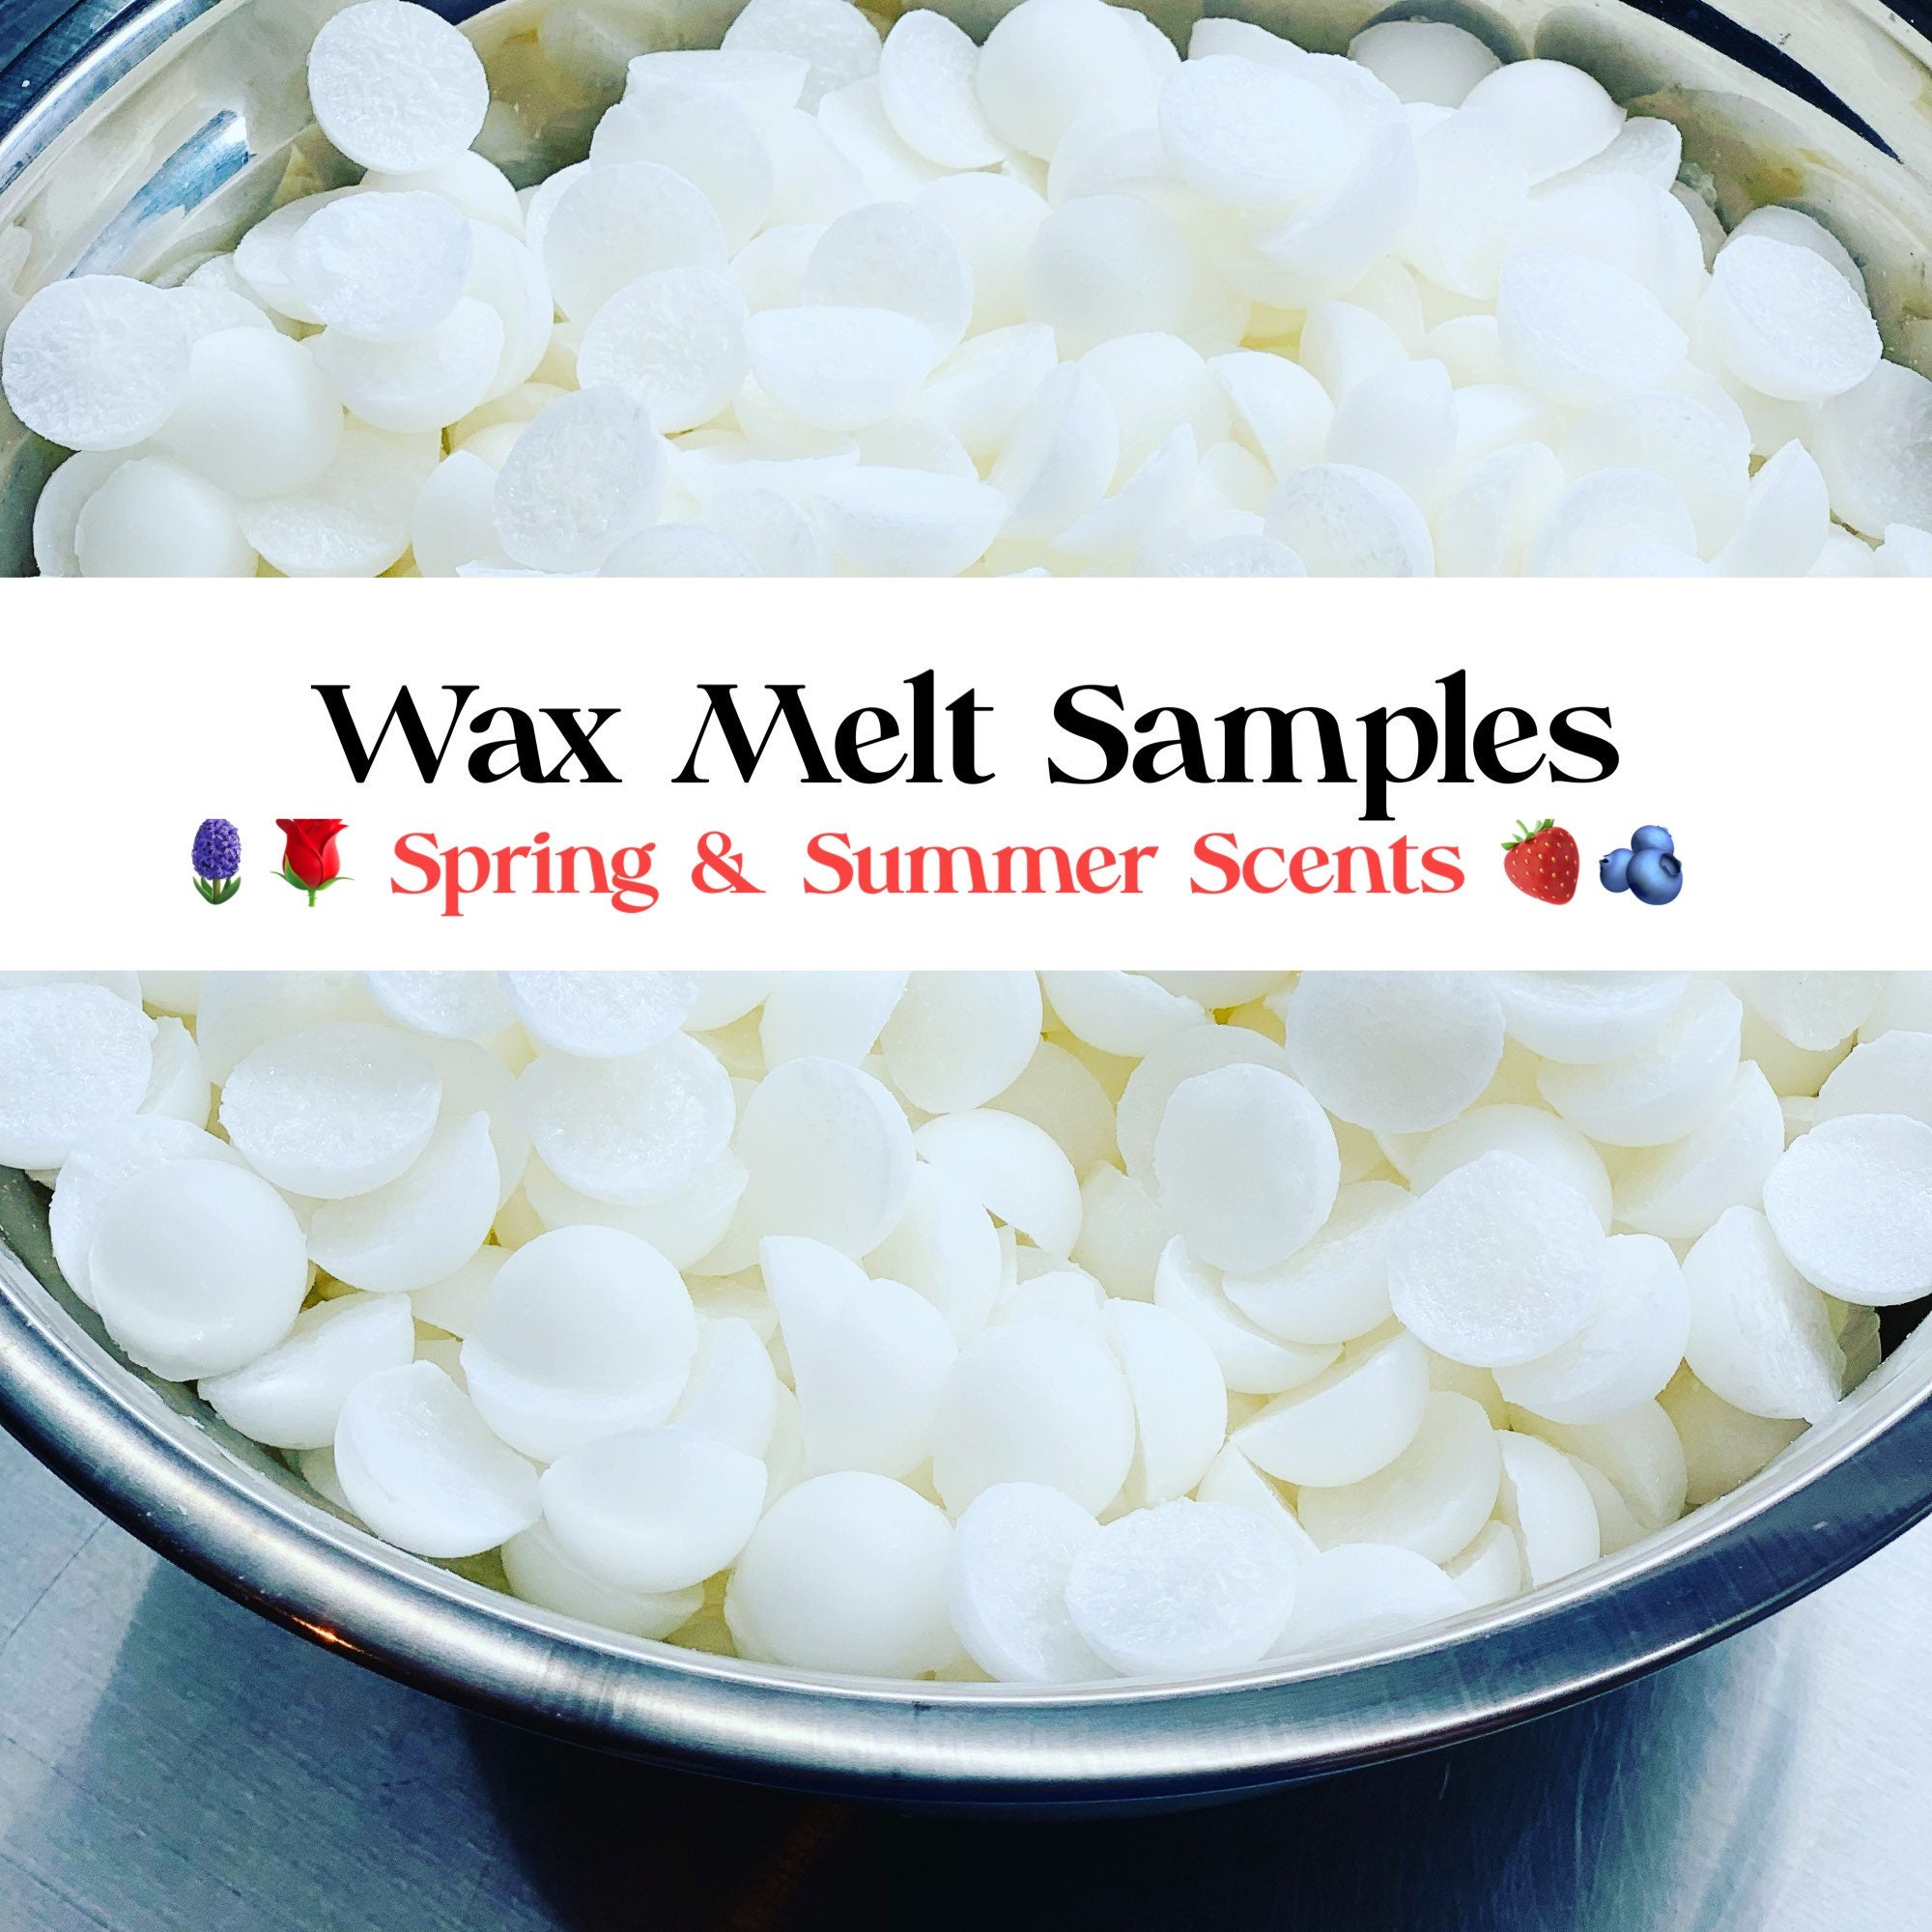 Happy Wax Spring Mix Scented Natural Soy Wax Melts 8 Oz. of